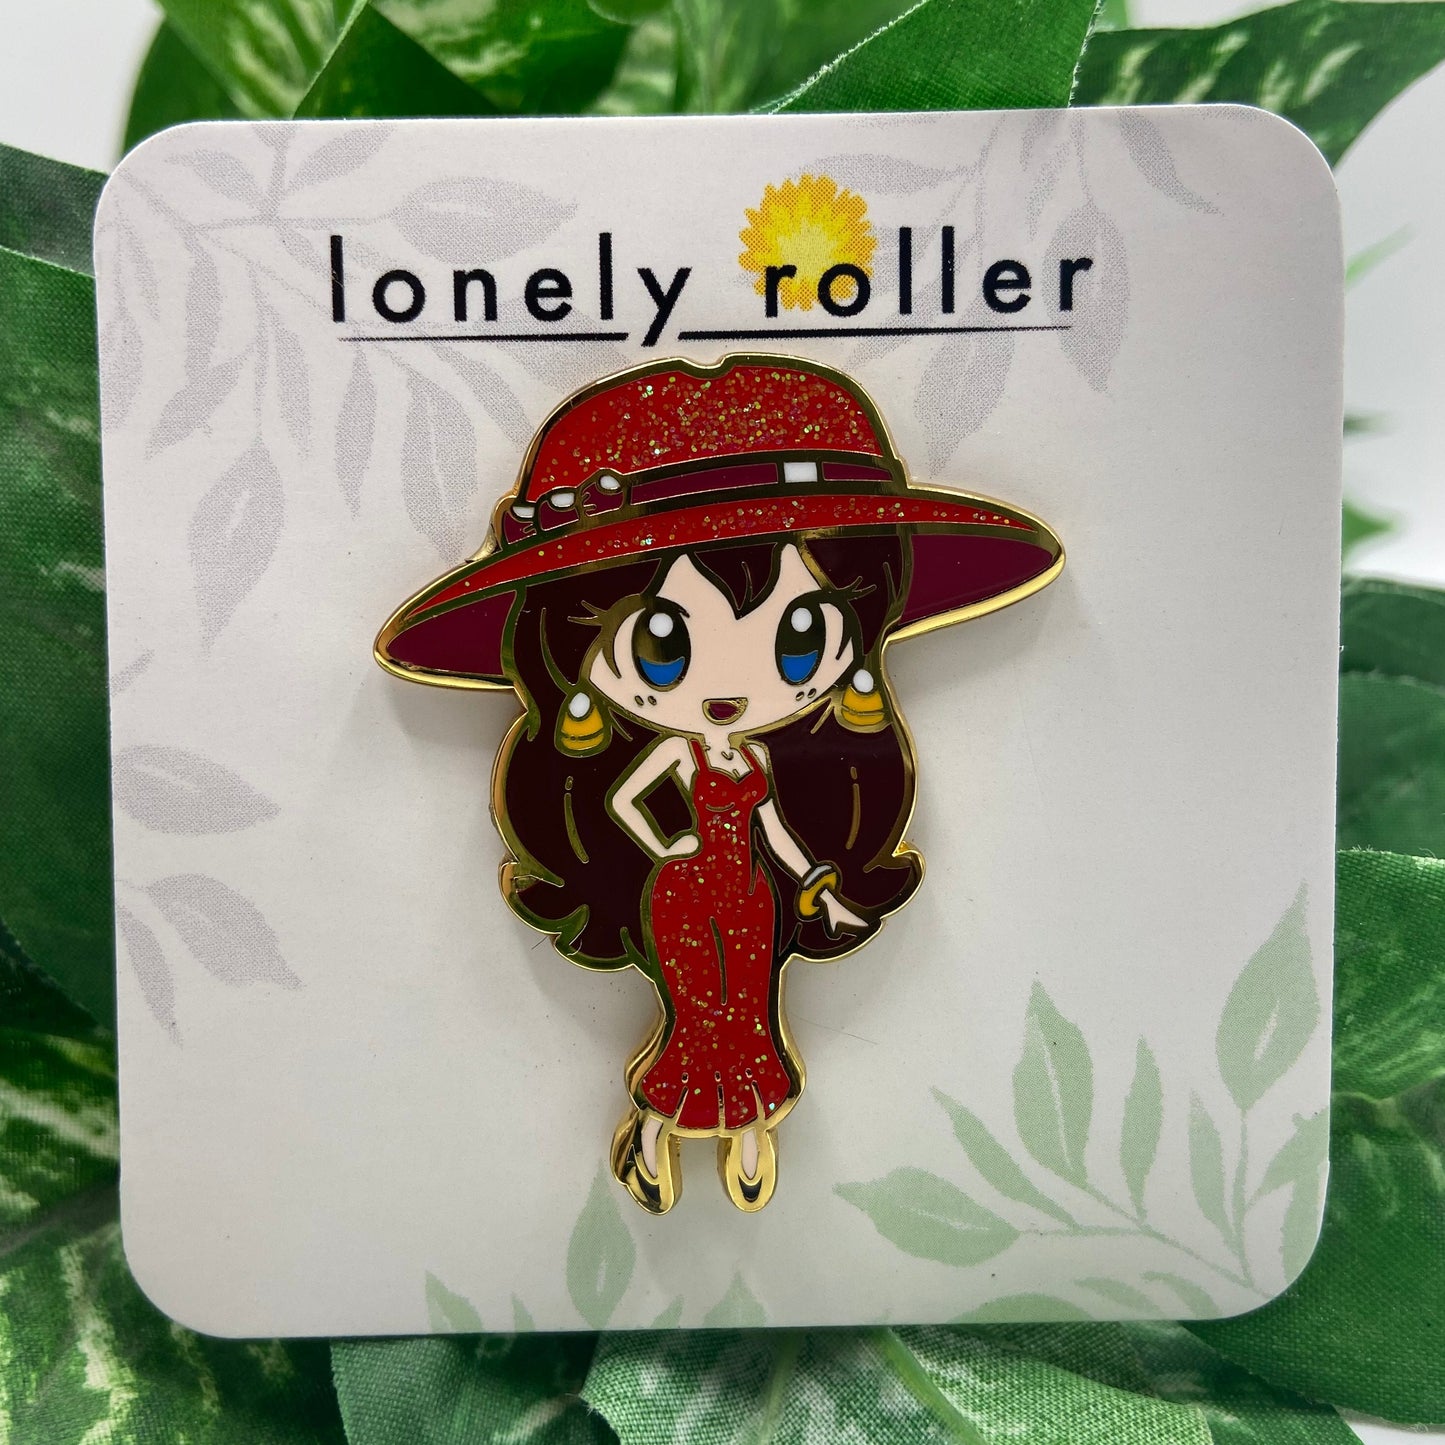 Mayor Pauline Super Mario Hard Enamel Pin on Backing Card with "lonely roller" text